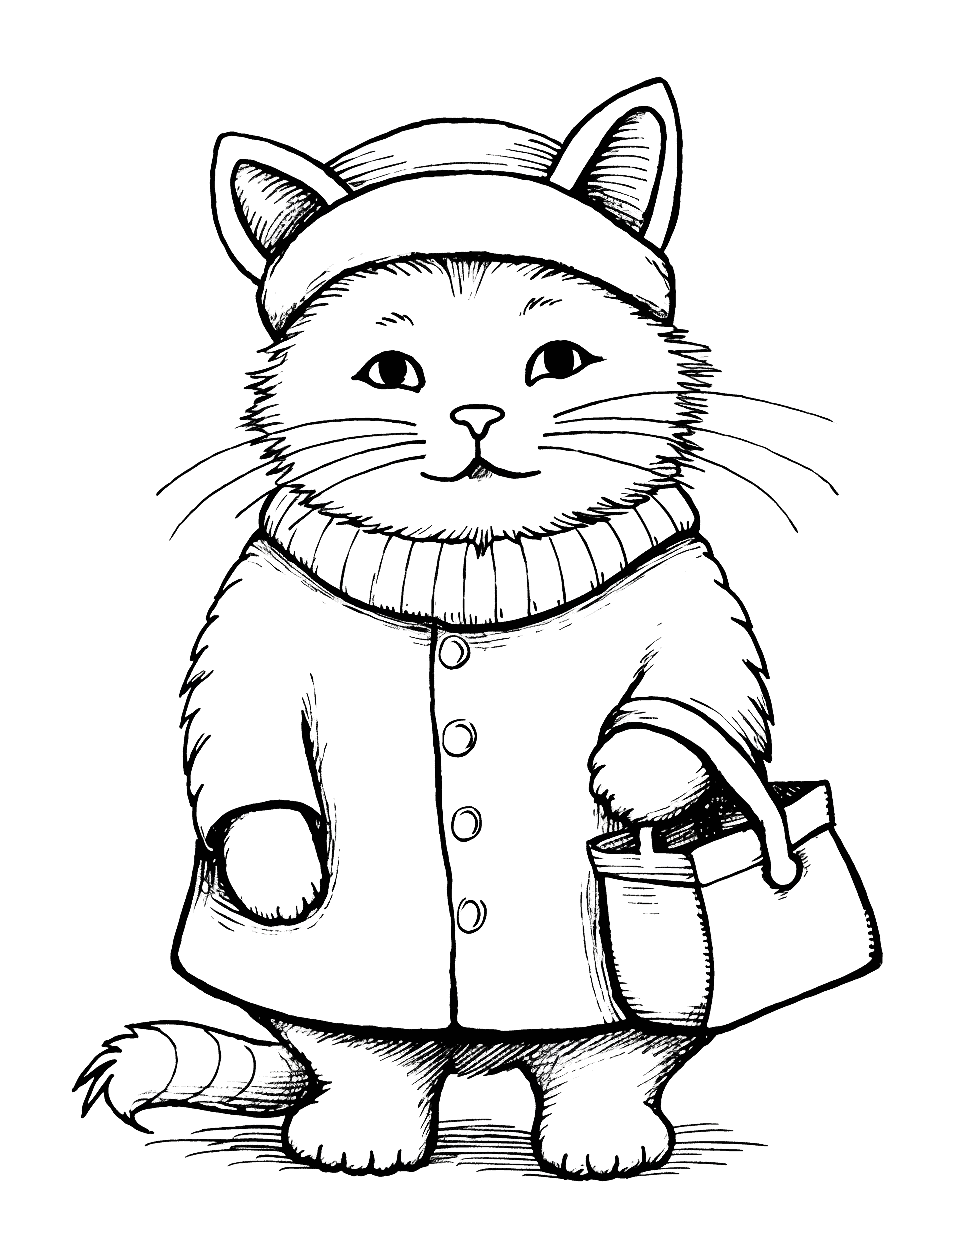 Cat Dressed for Christmas Coloring Page - A chubby cat dressed in warm winter clothes ready for Christmas.